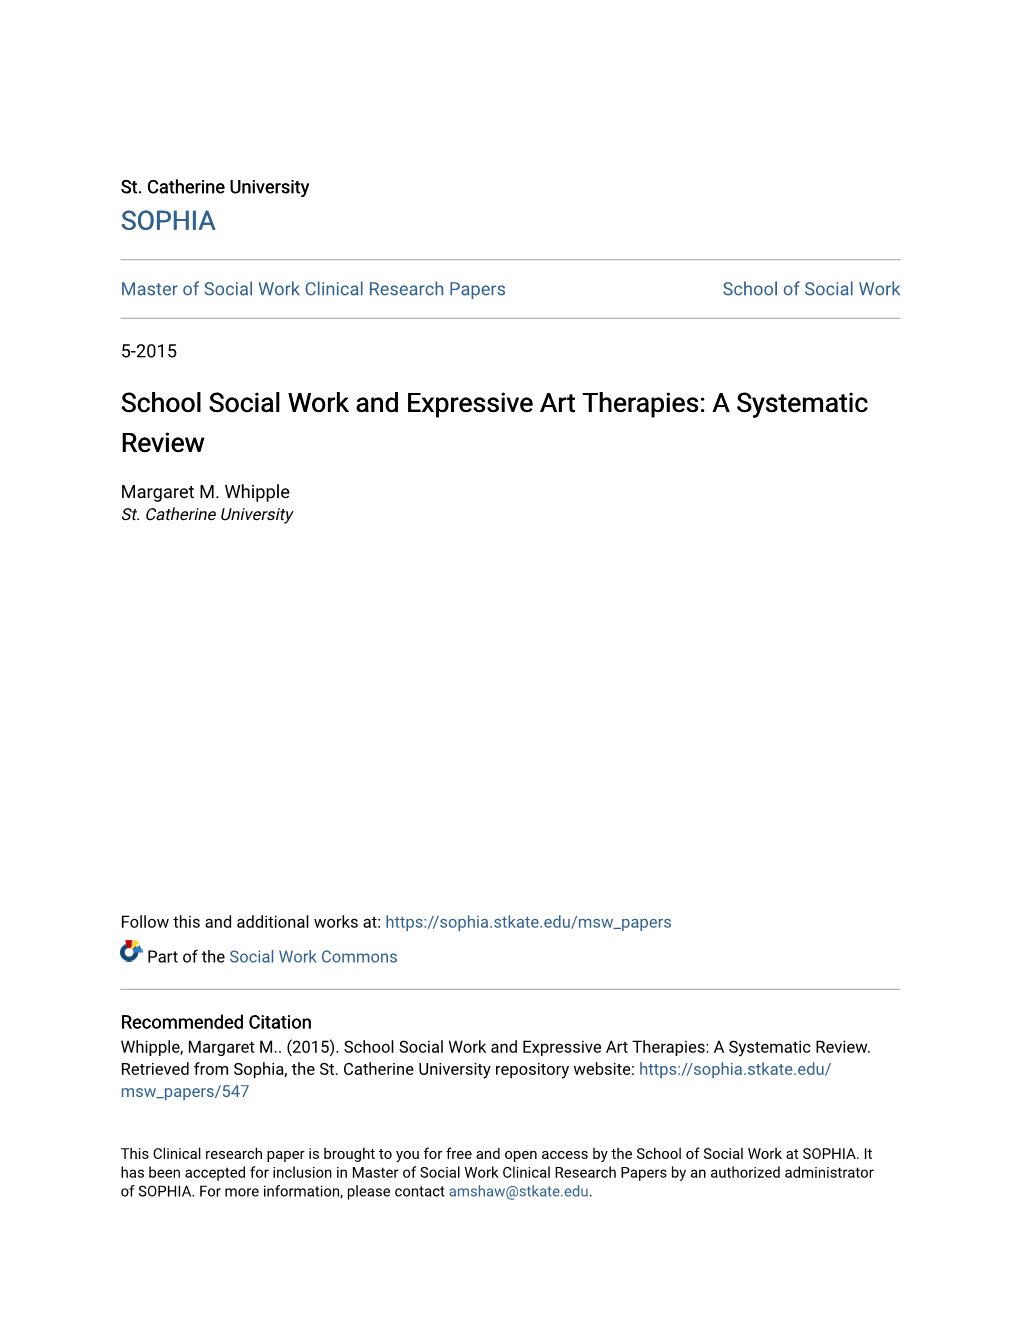 School Social Work and Expressive Art Therapies: a Systematic Review